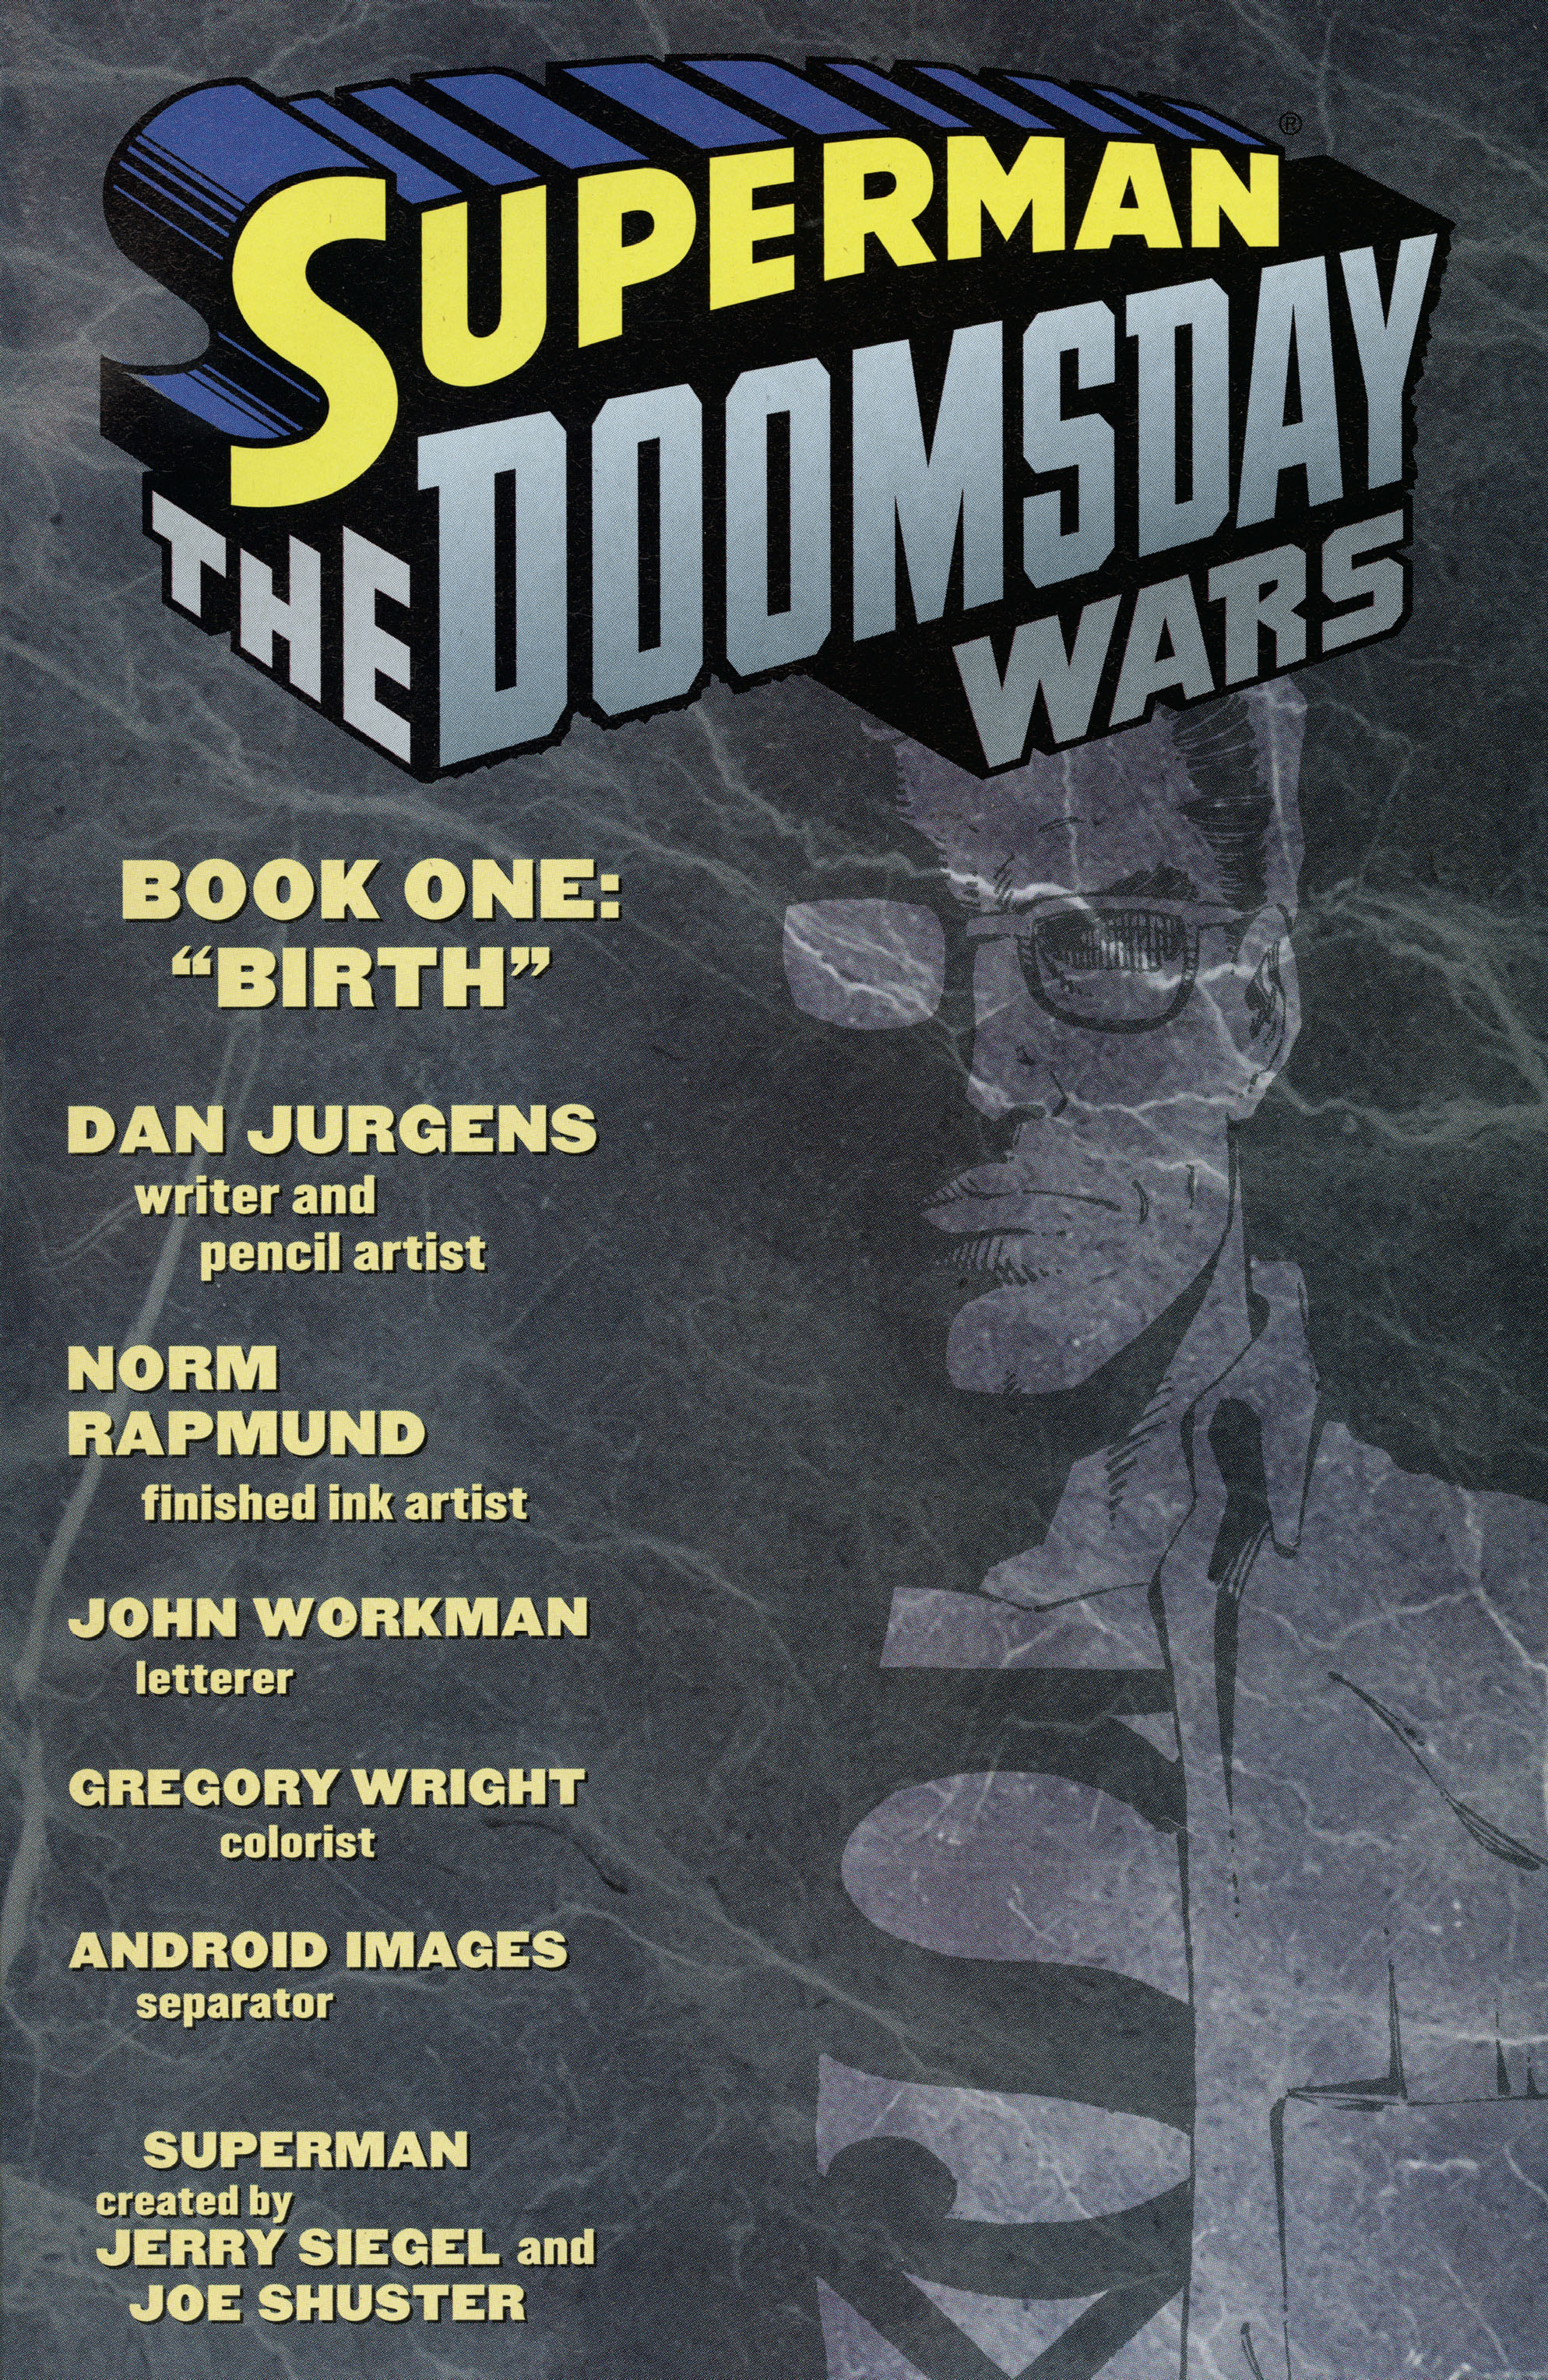 Read online Superman: The Doomsday Wars comic -  Issue #1 - 2